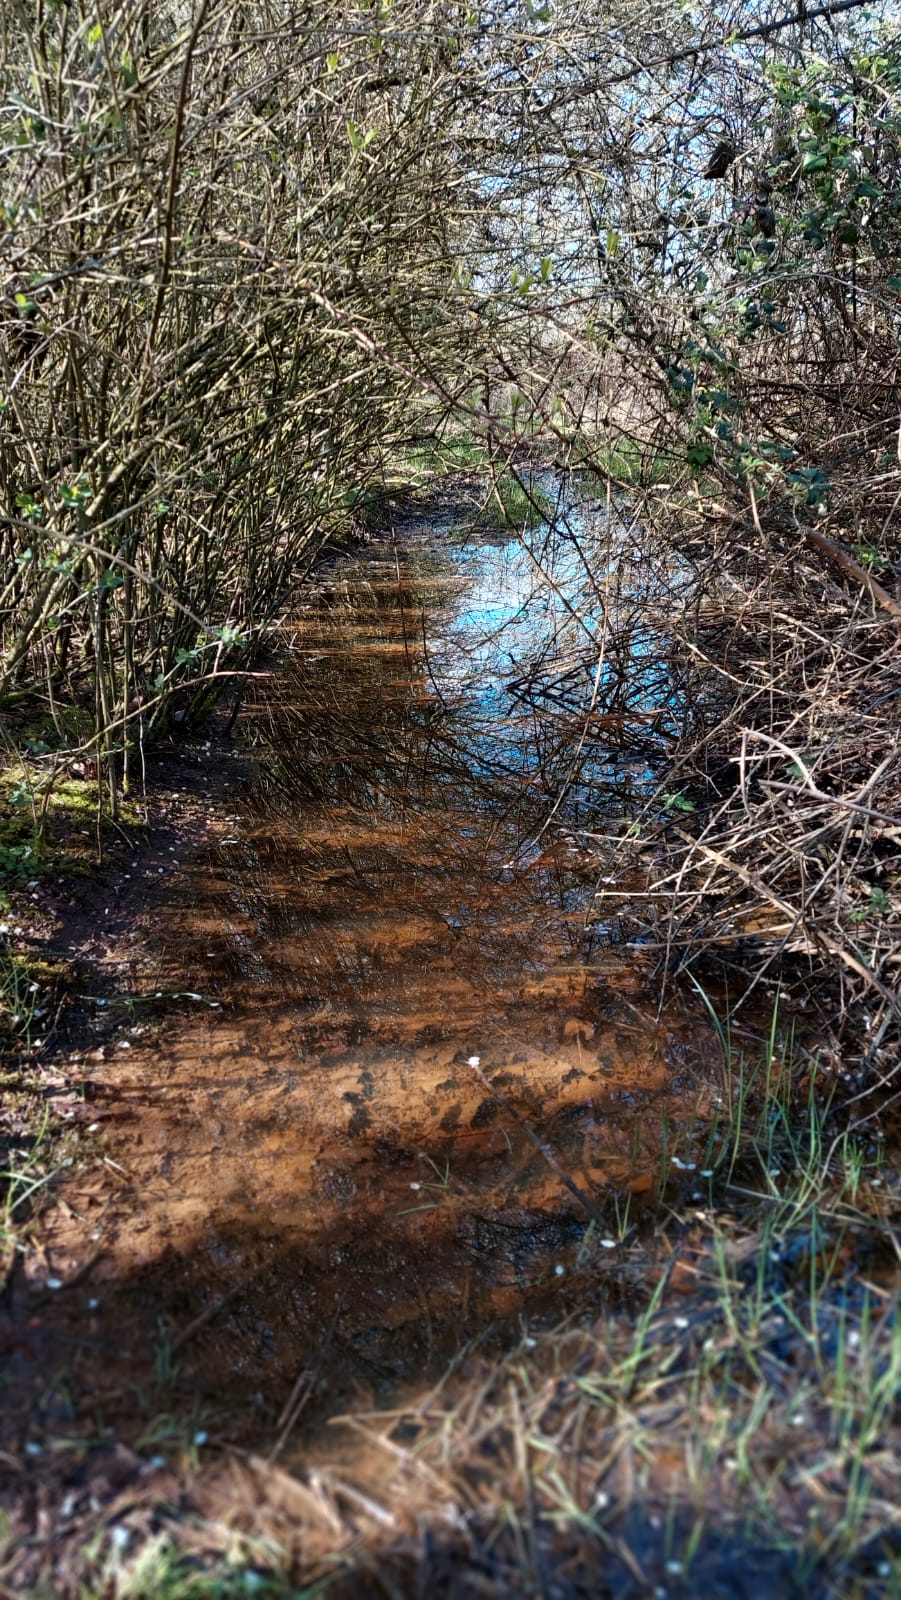 A photograph of a brook in dappled shade